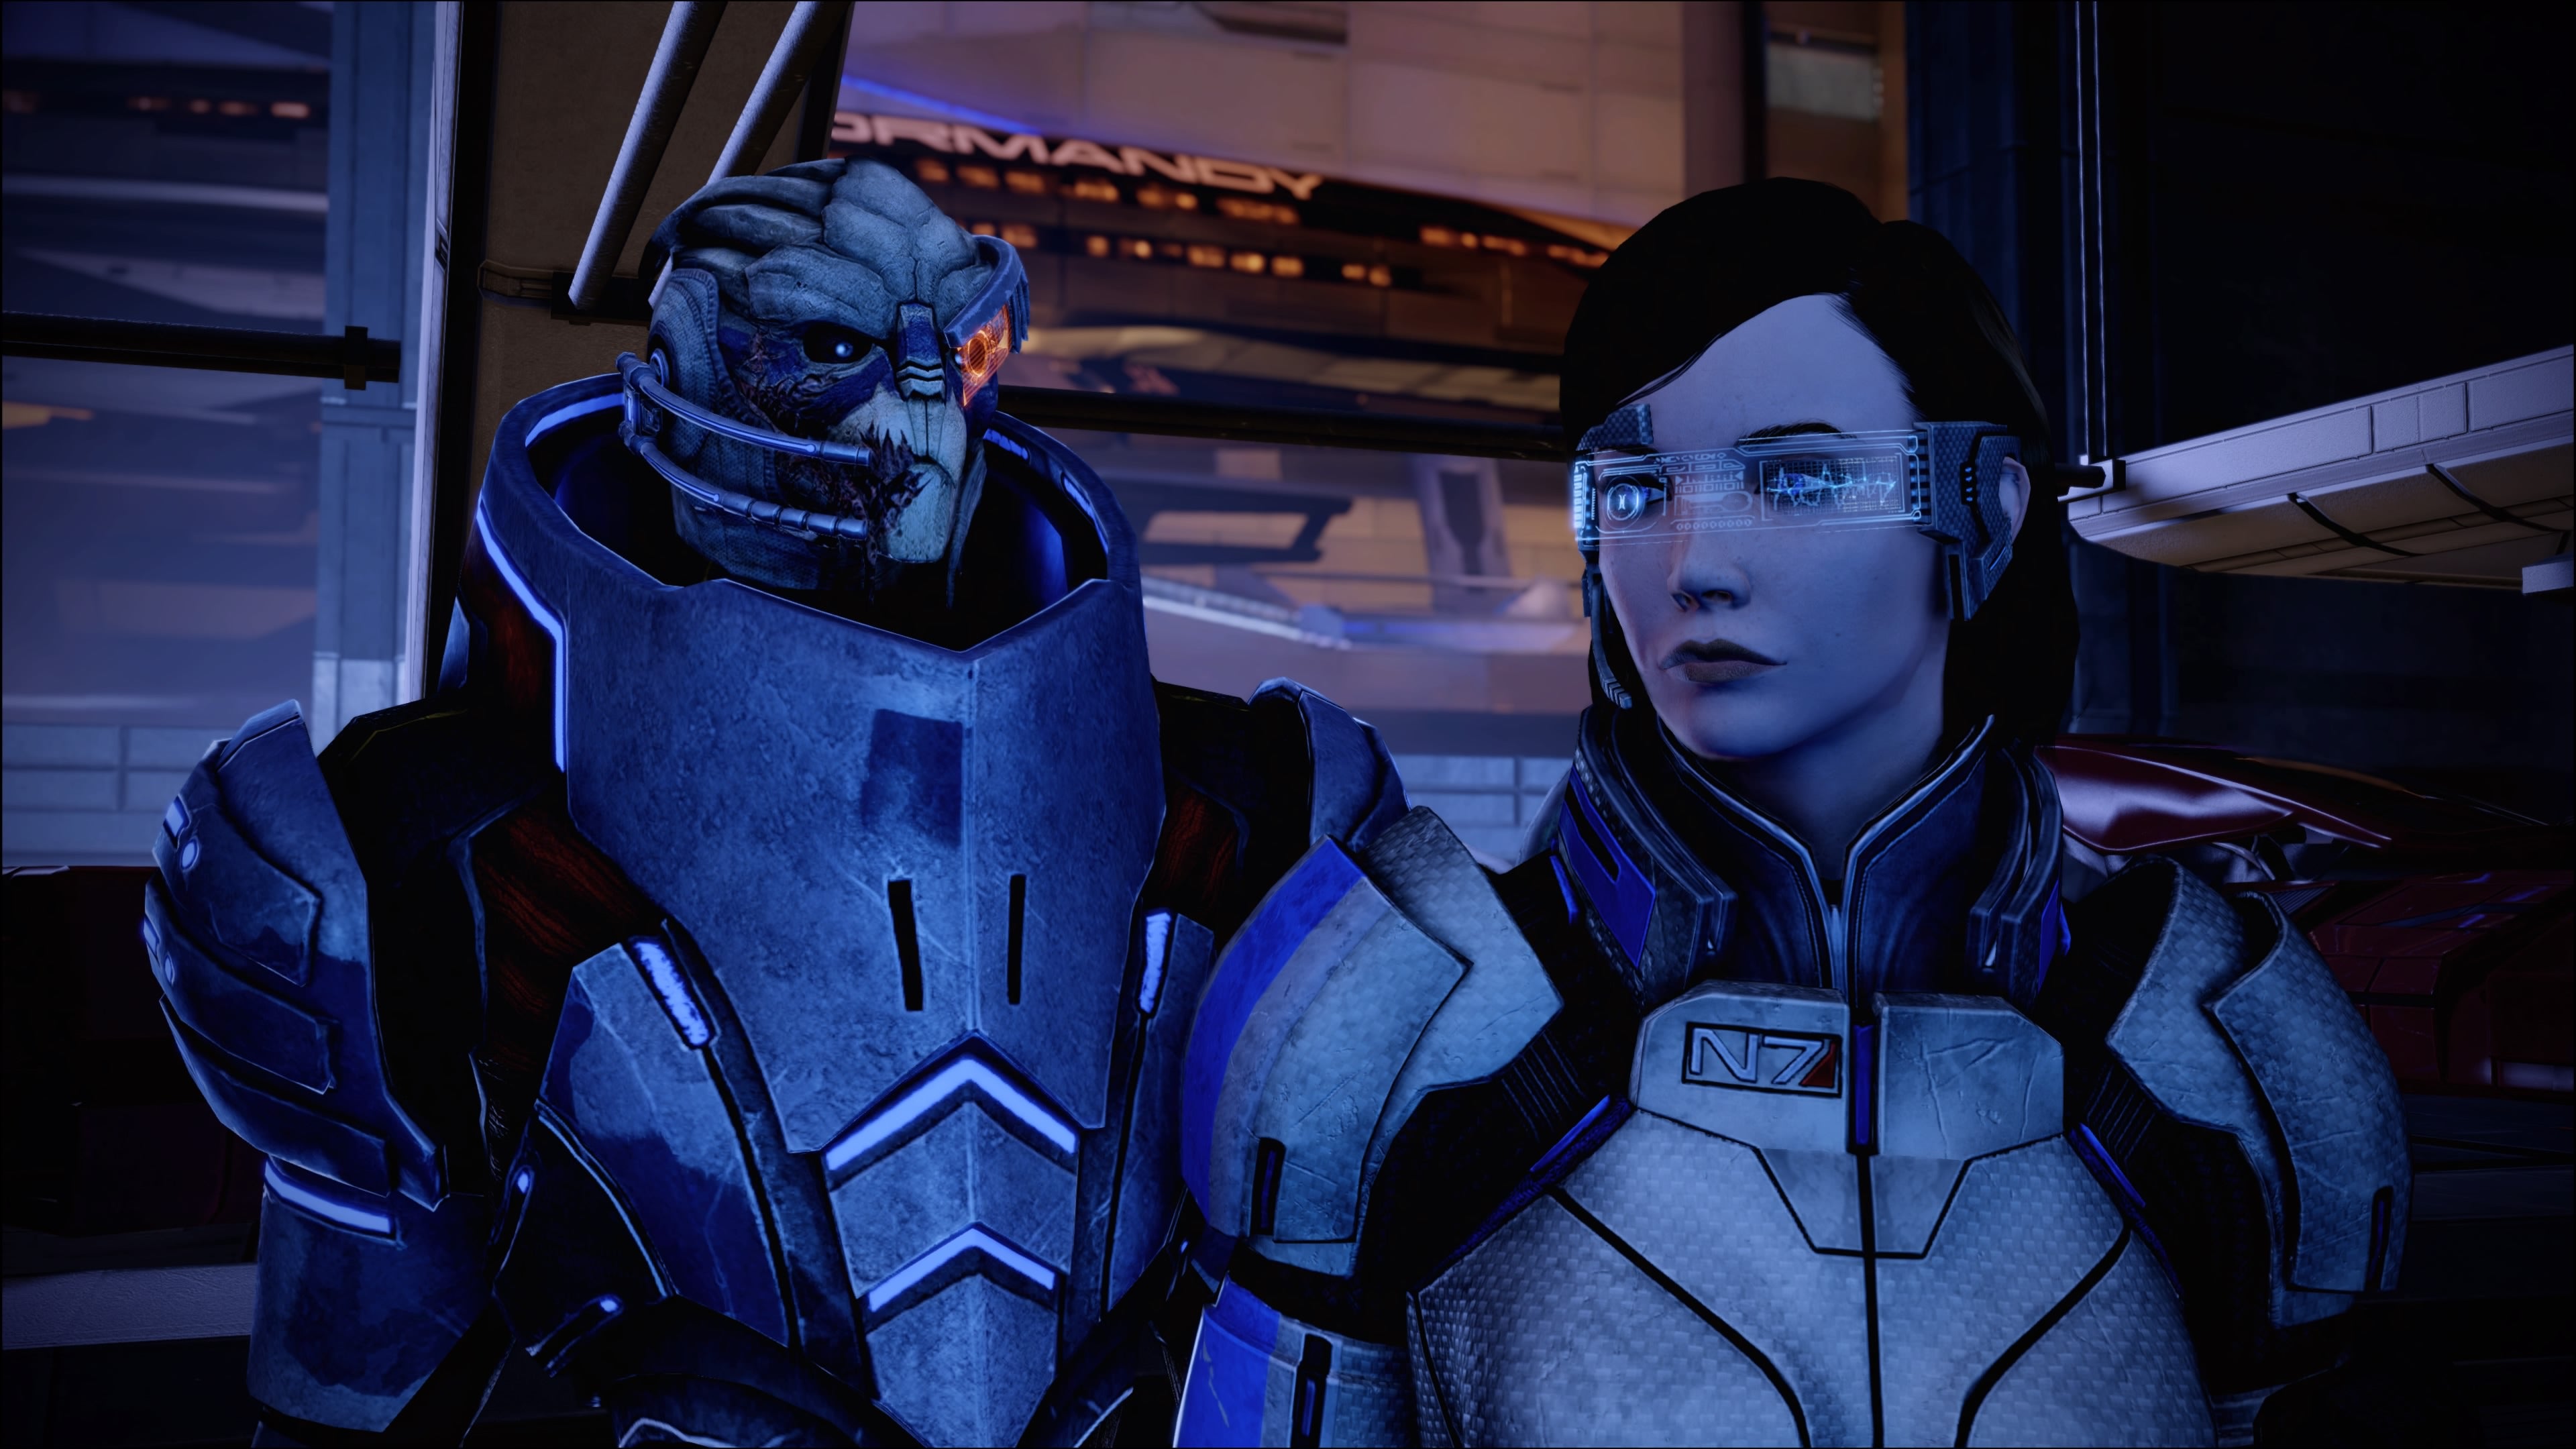 Garrus and Shepard stood next to each other during Garrus's loyalty mission in Mass Effect 2.